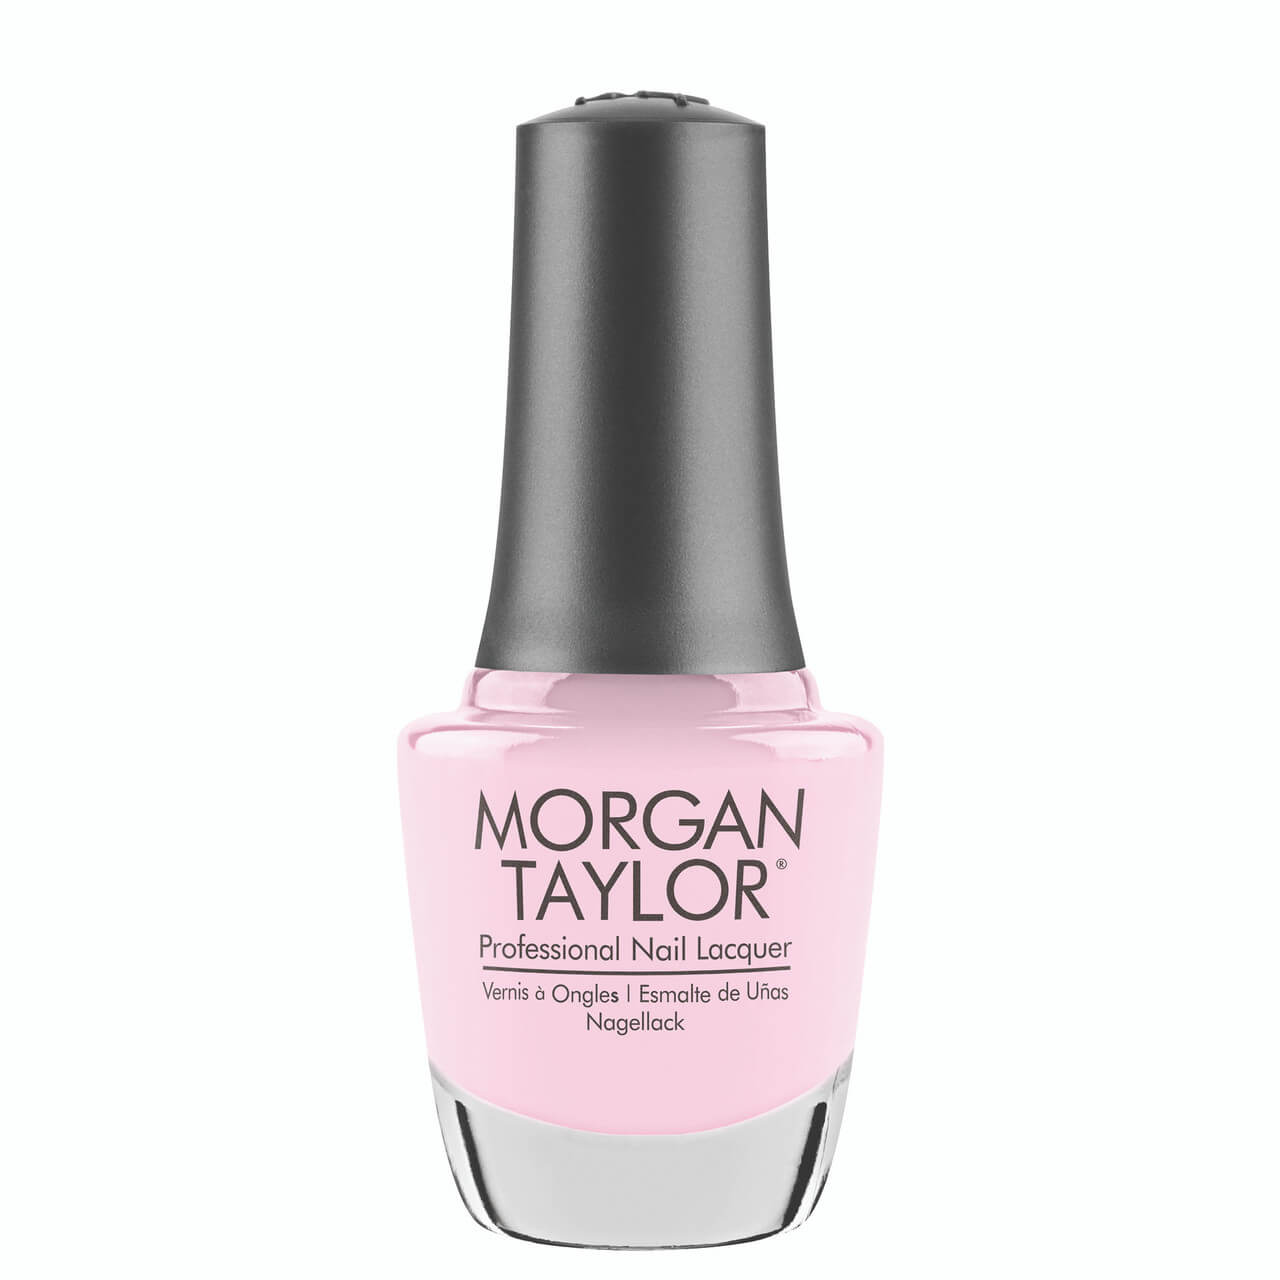 Morgan Taylor Nail Lacquer - You're So Sweet, You’re Giving Me A Toothache 0.5 oz - #3110908 - Premier Nail Supply 